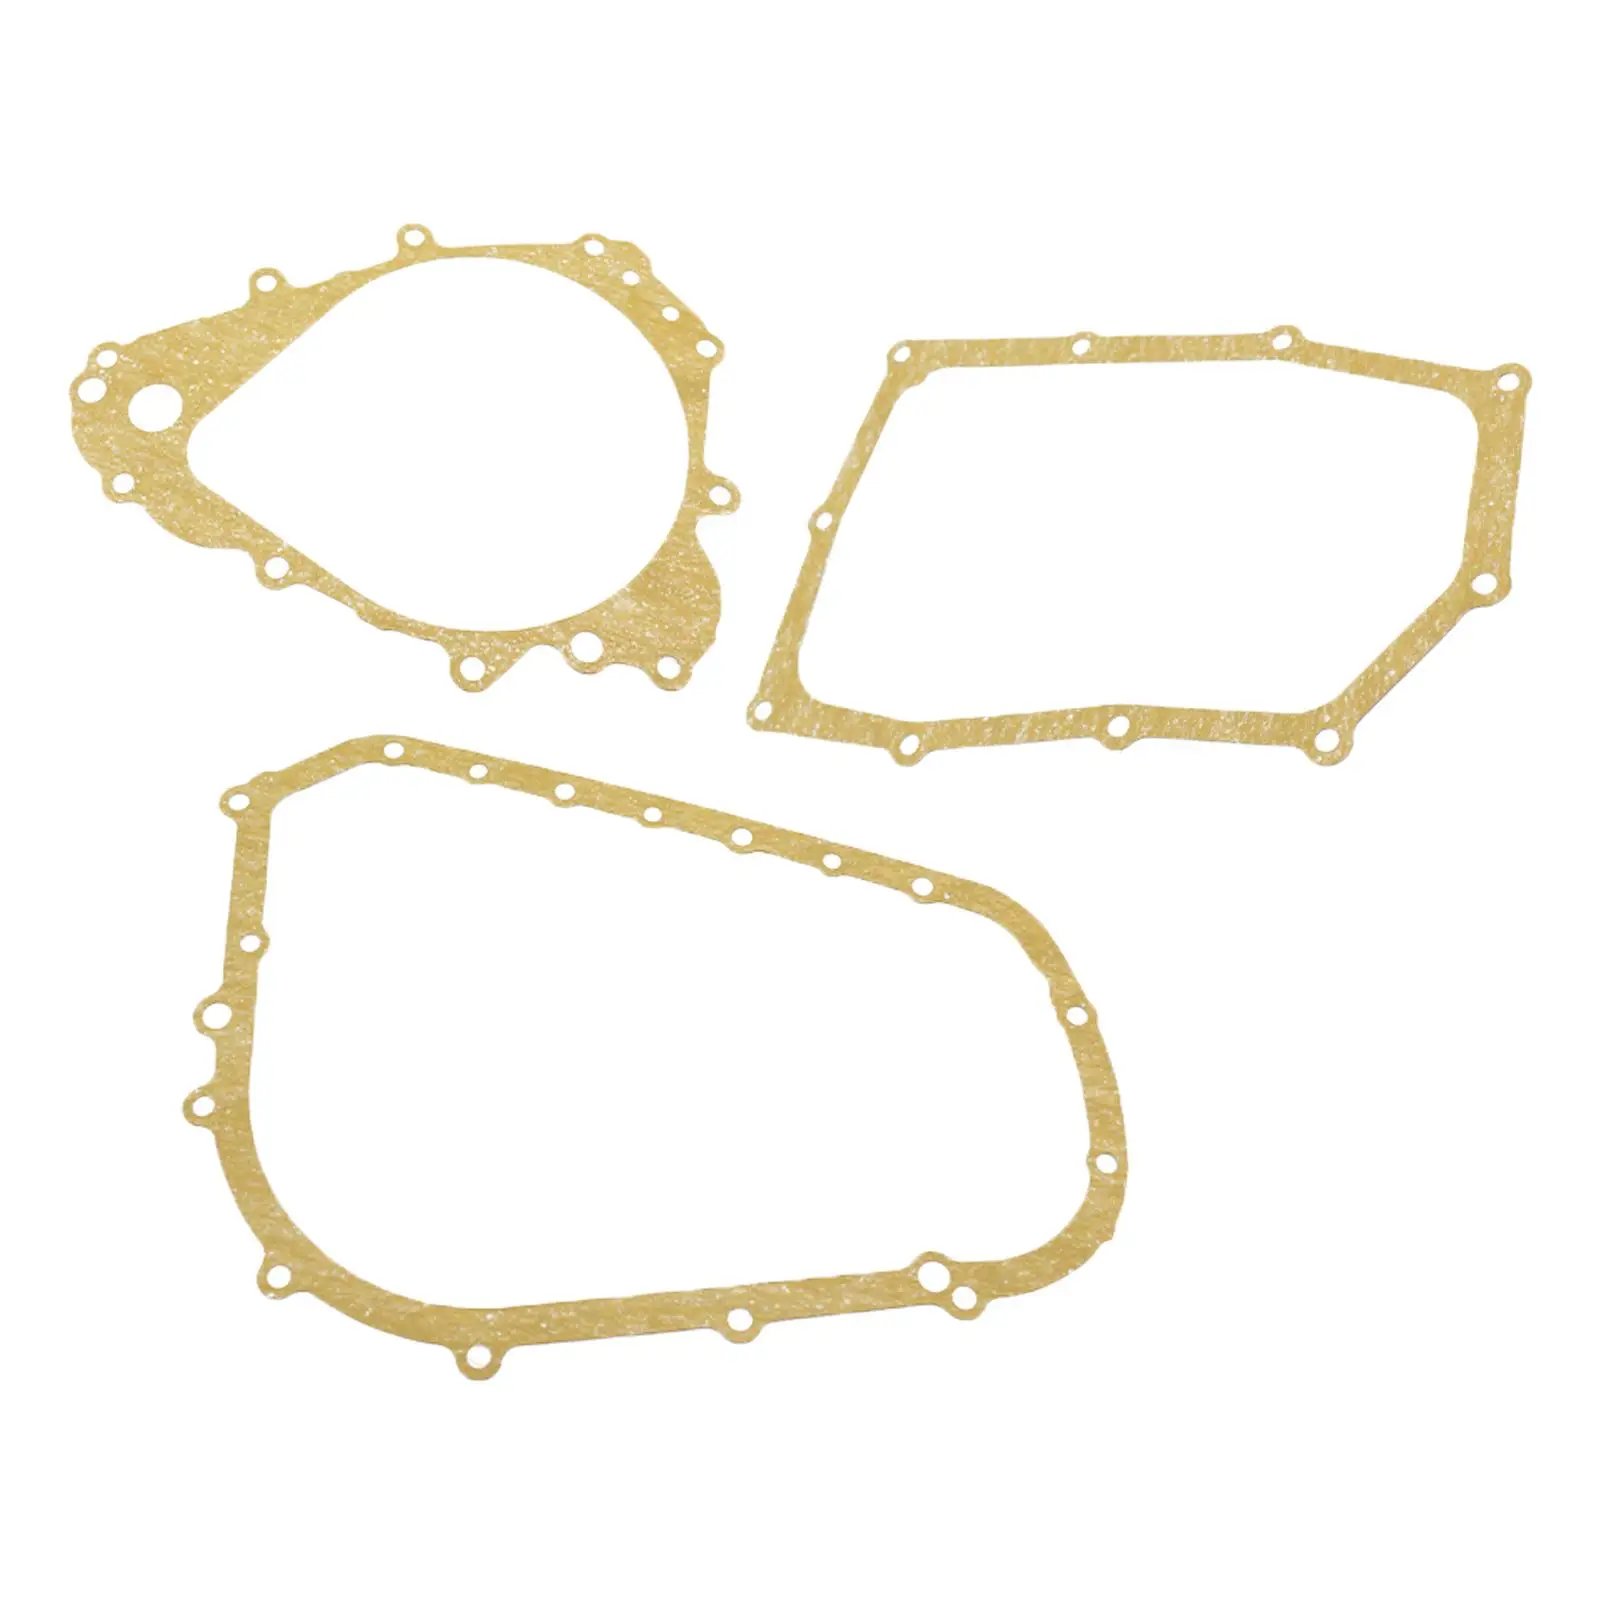 Clutch Oil Pan Cover Gasket Replaces for Suzuki Accessories